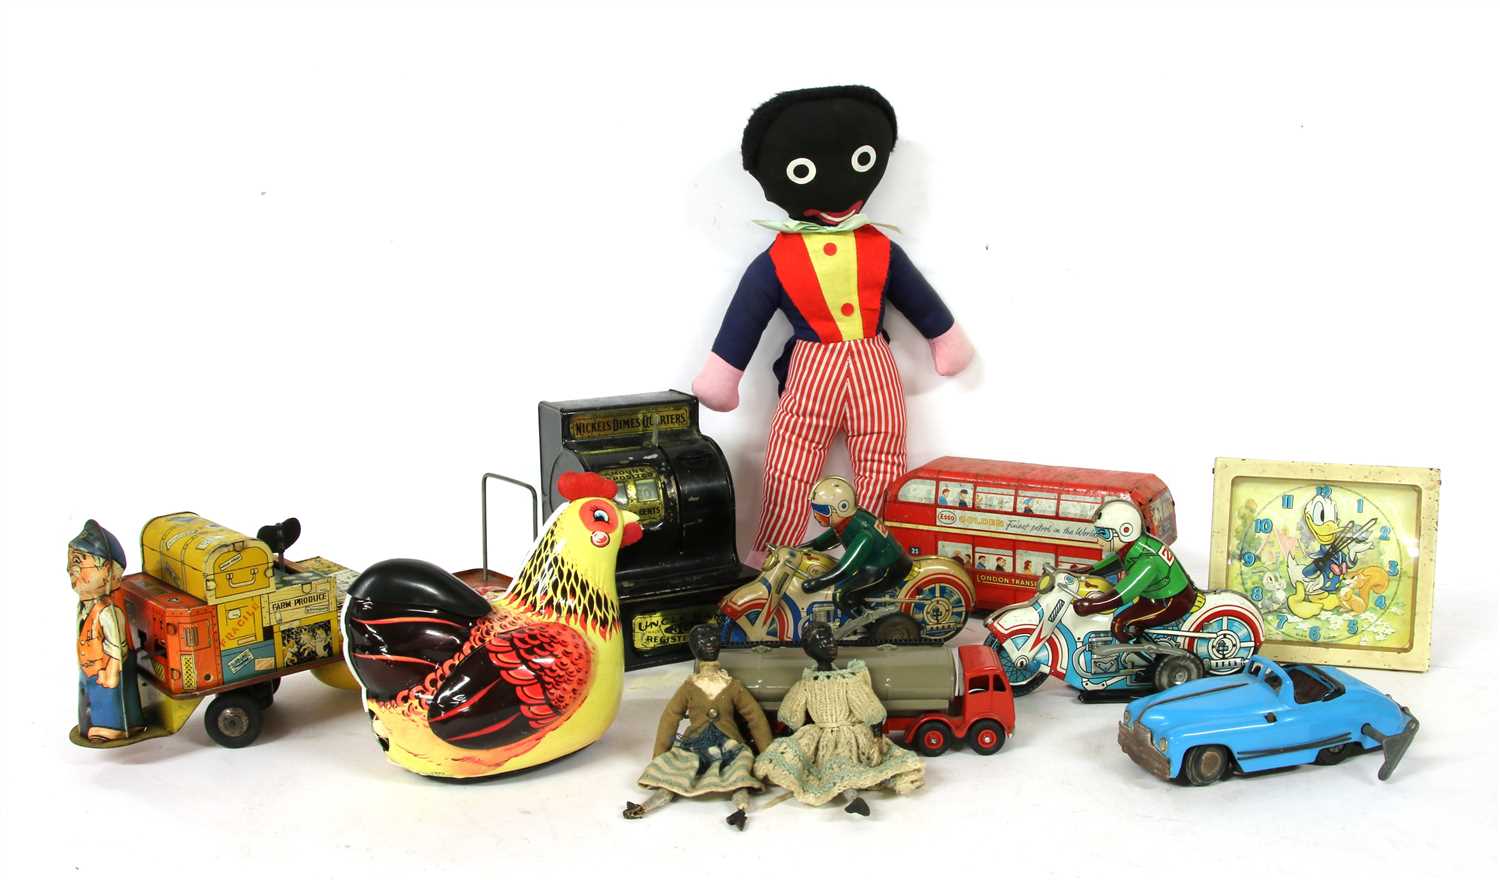 Vintage Toys For Sale: Lucrative Business or Love Letter to Nostalgia?